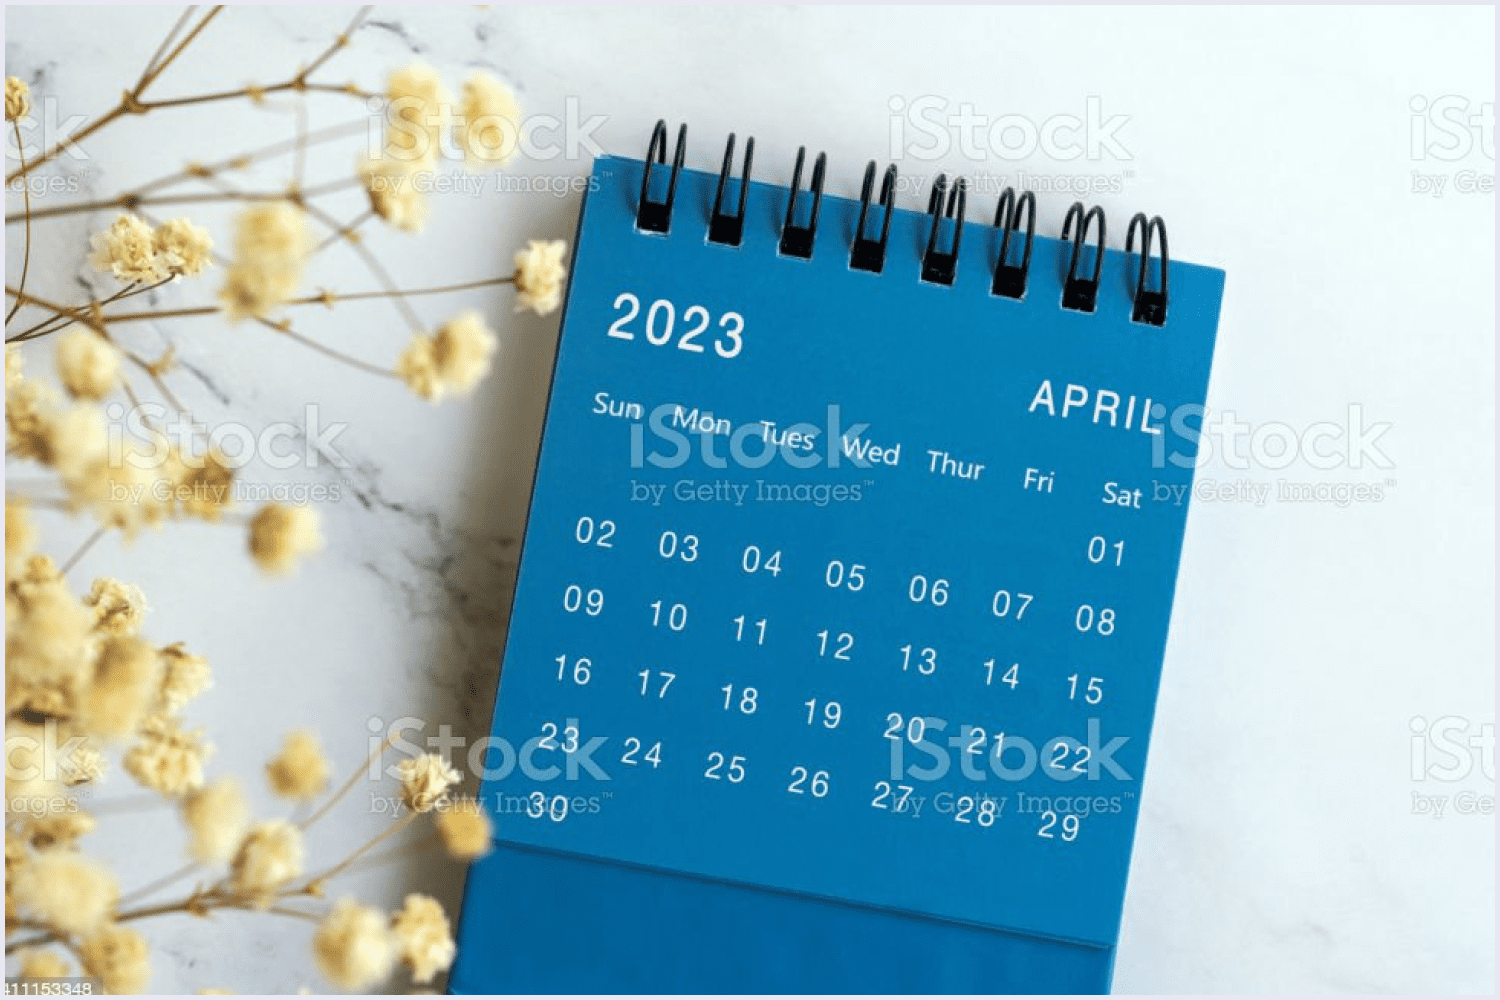 Photo of the calendar for April 2023 on a blue background and a twig of flowers.